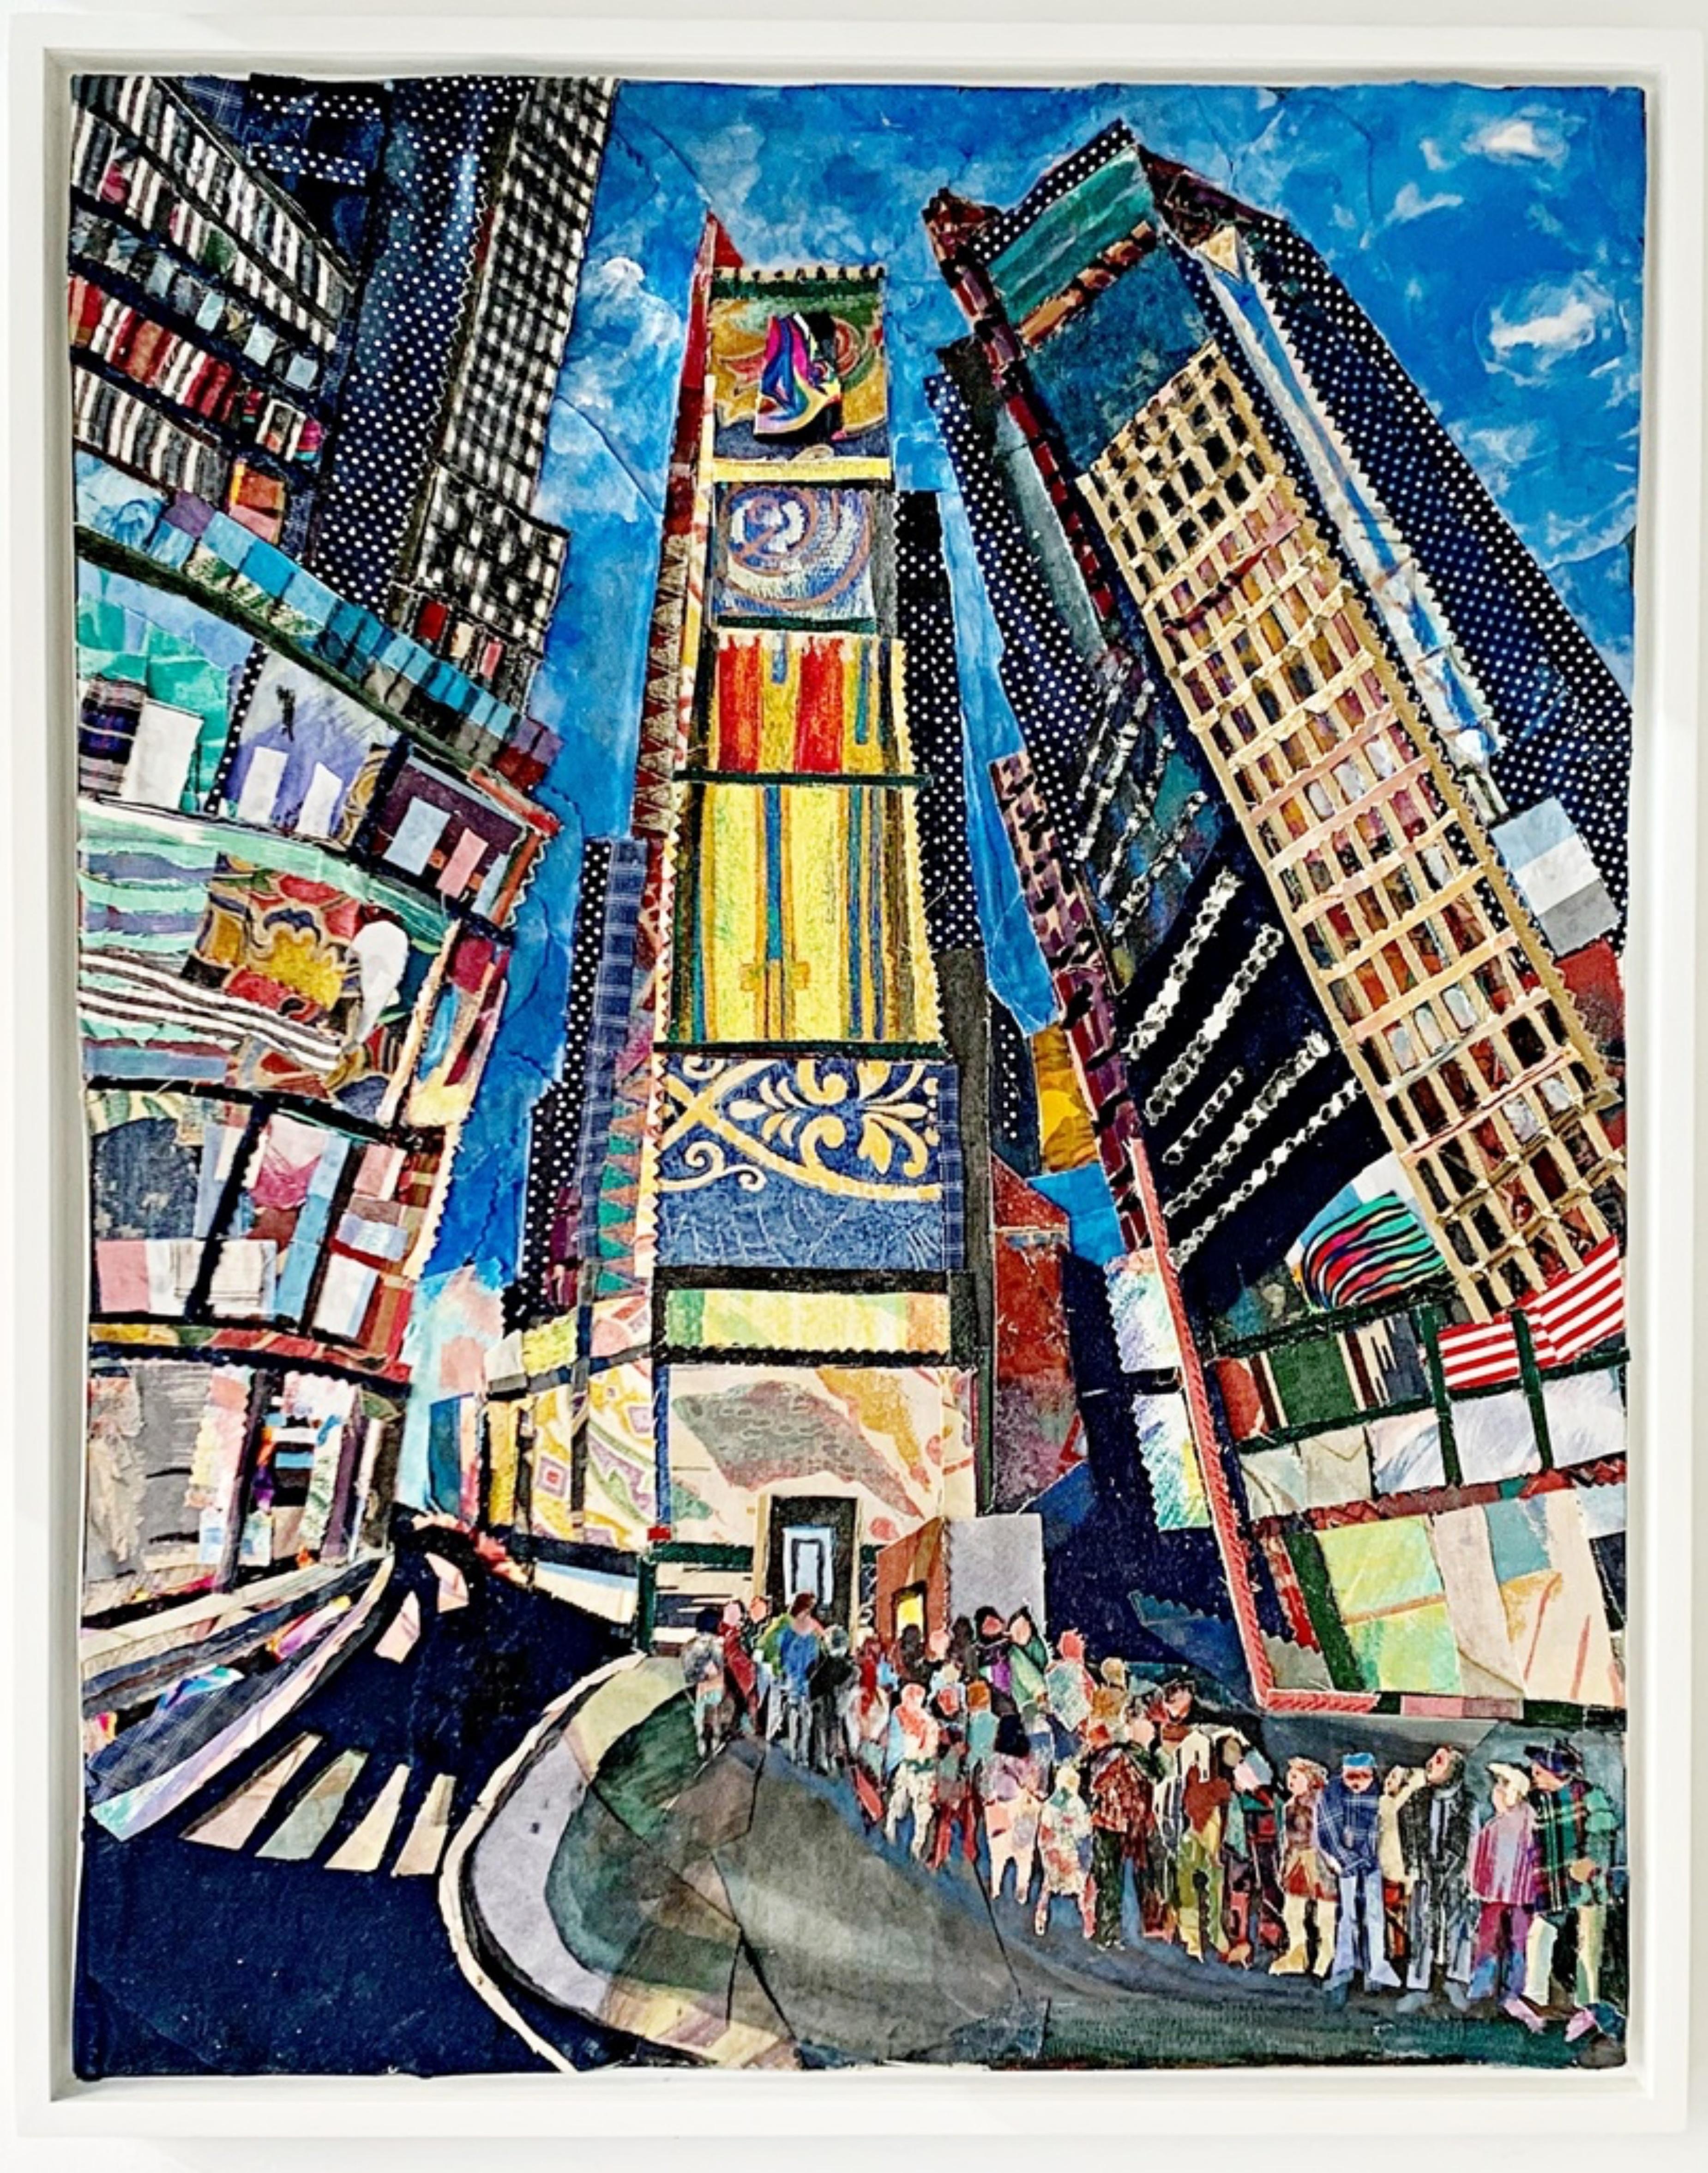 Times Square I - Mixed Media Art by Thelma Appel